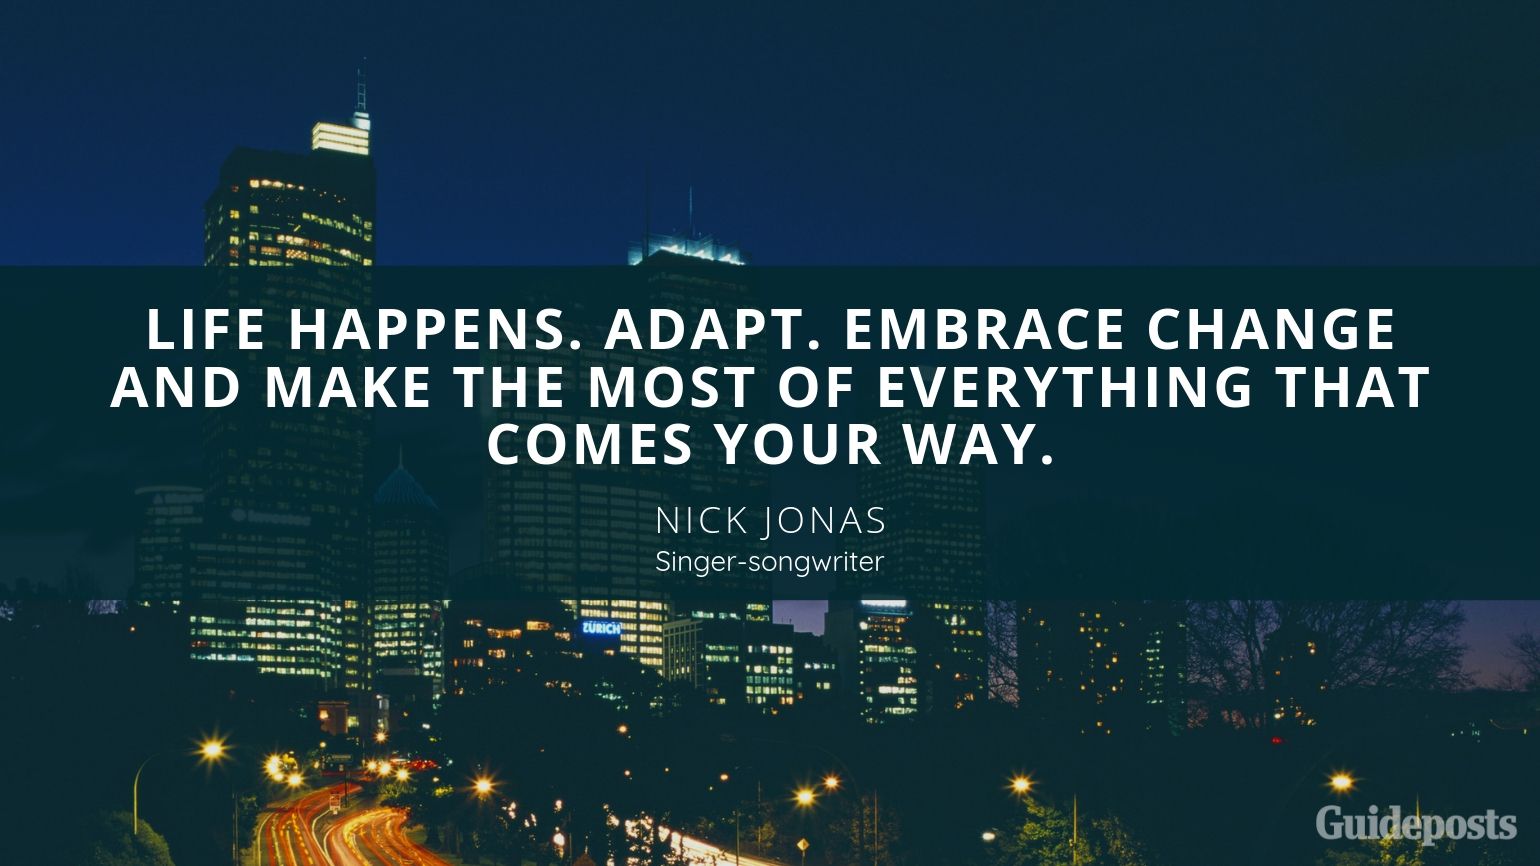 Nick Jonas singer songwriter Inspirational Quote Embracing Change Better Living Life Advice Managing Life Changes